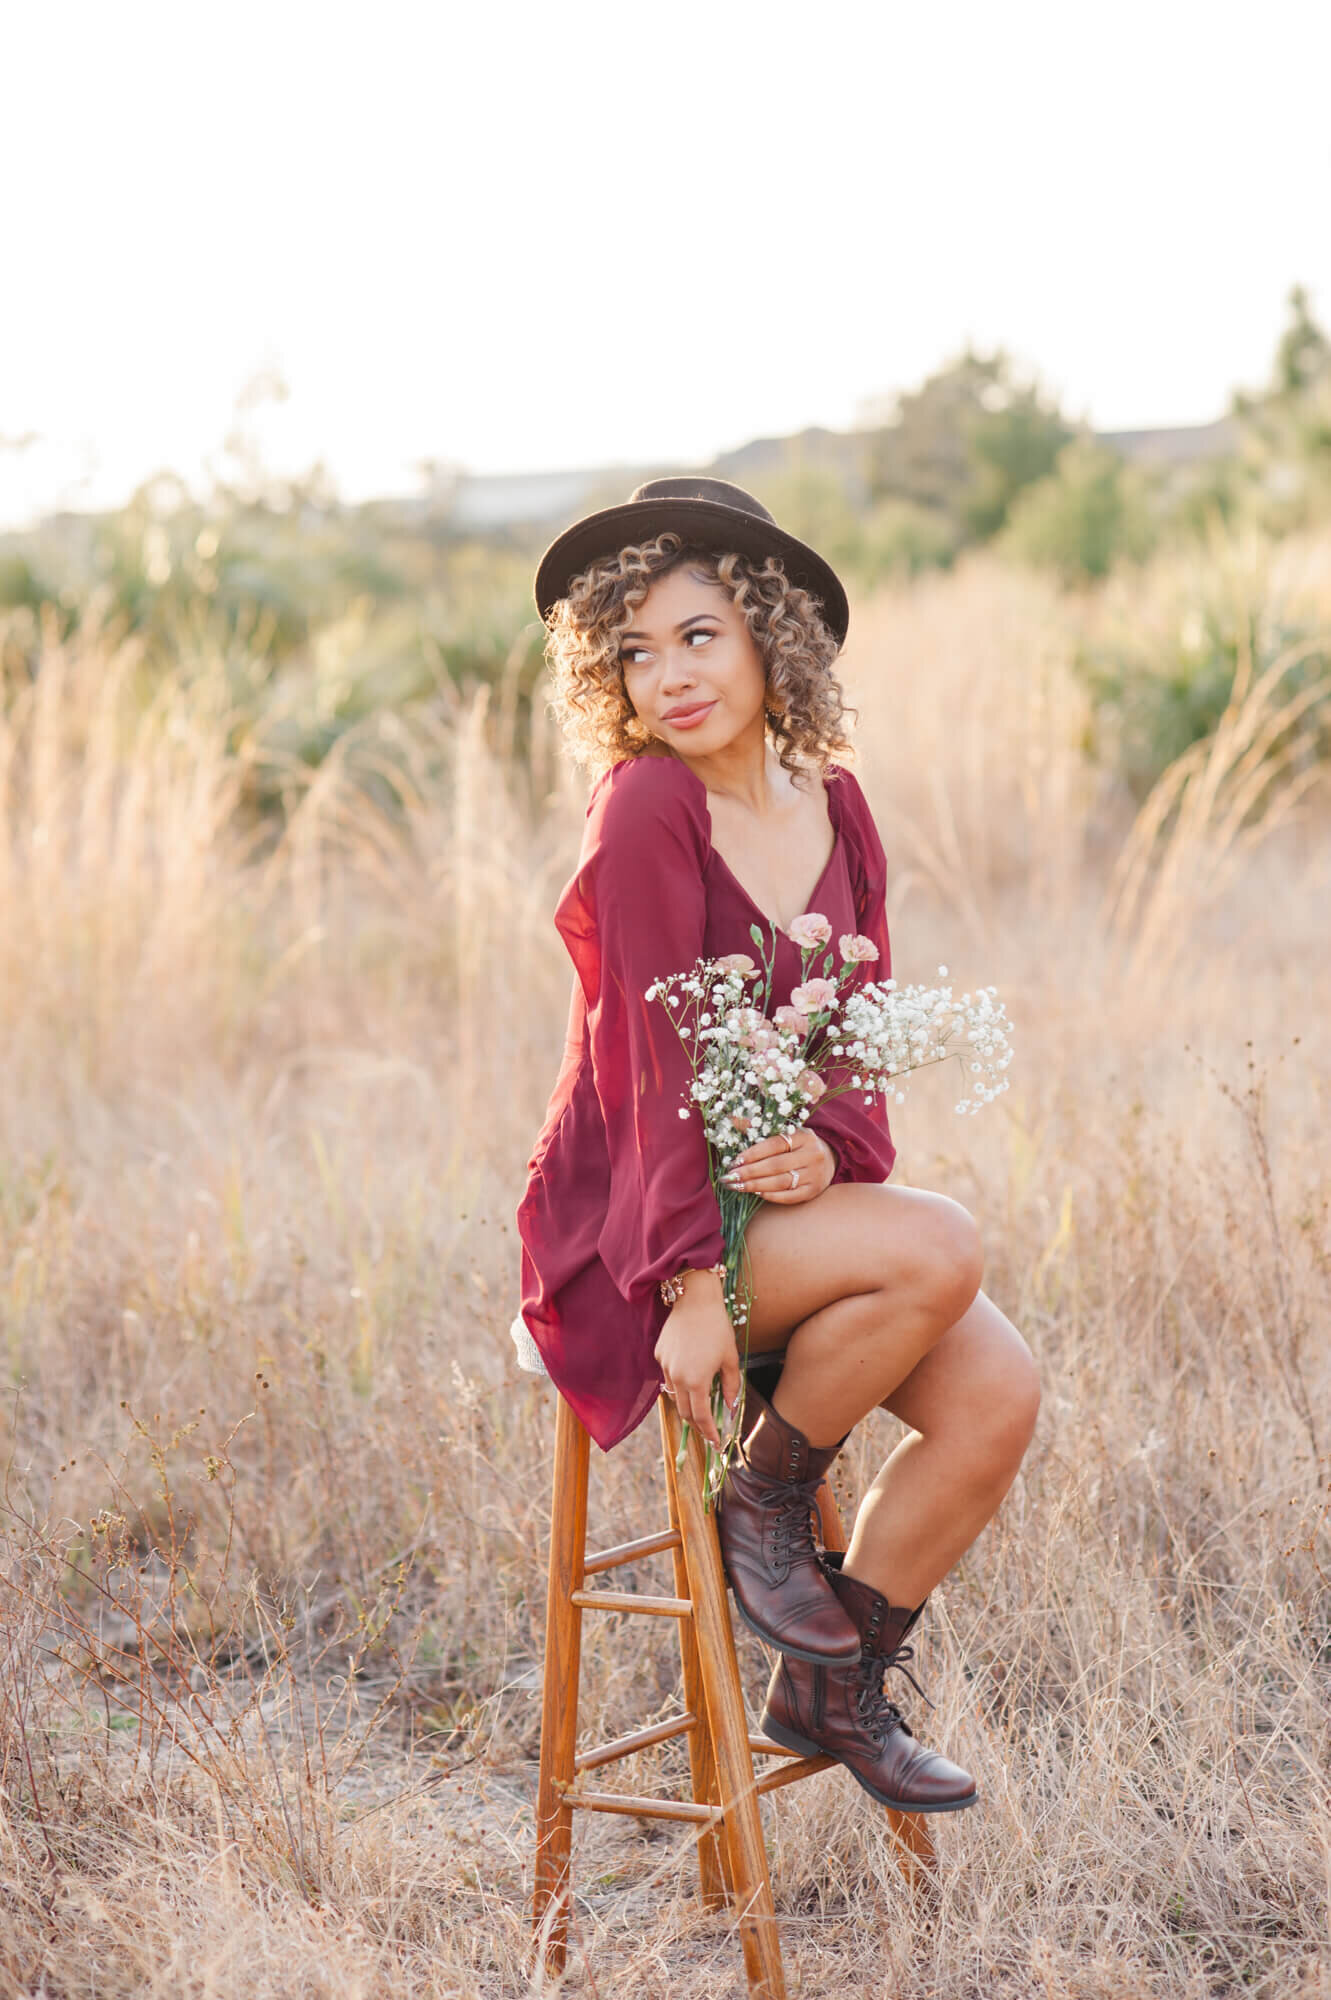 Stunning senior girl with curly hair holding a floral bouquet and sitting on a barstool in a tall grass field at sunset